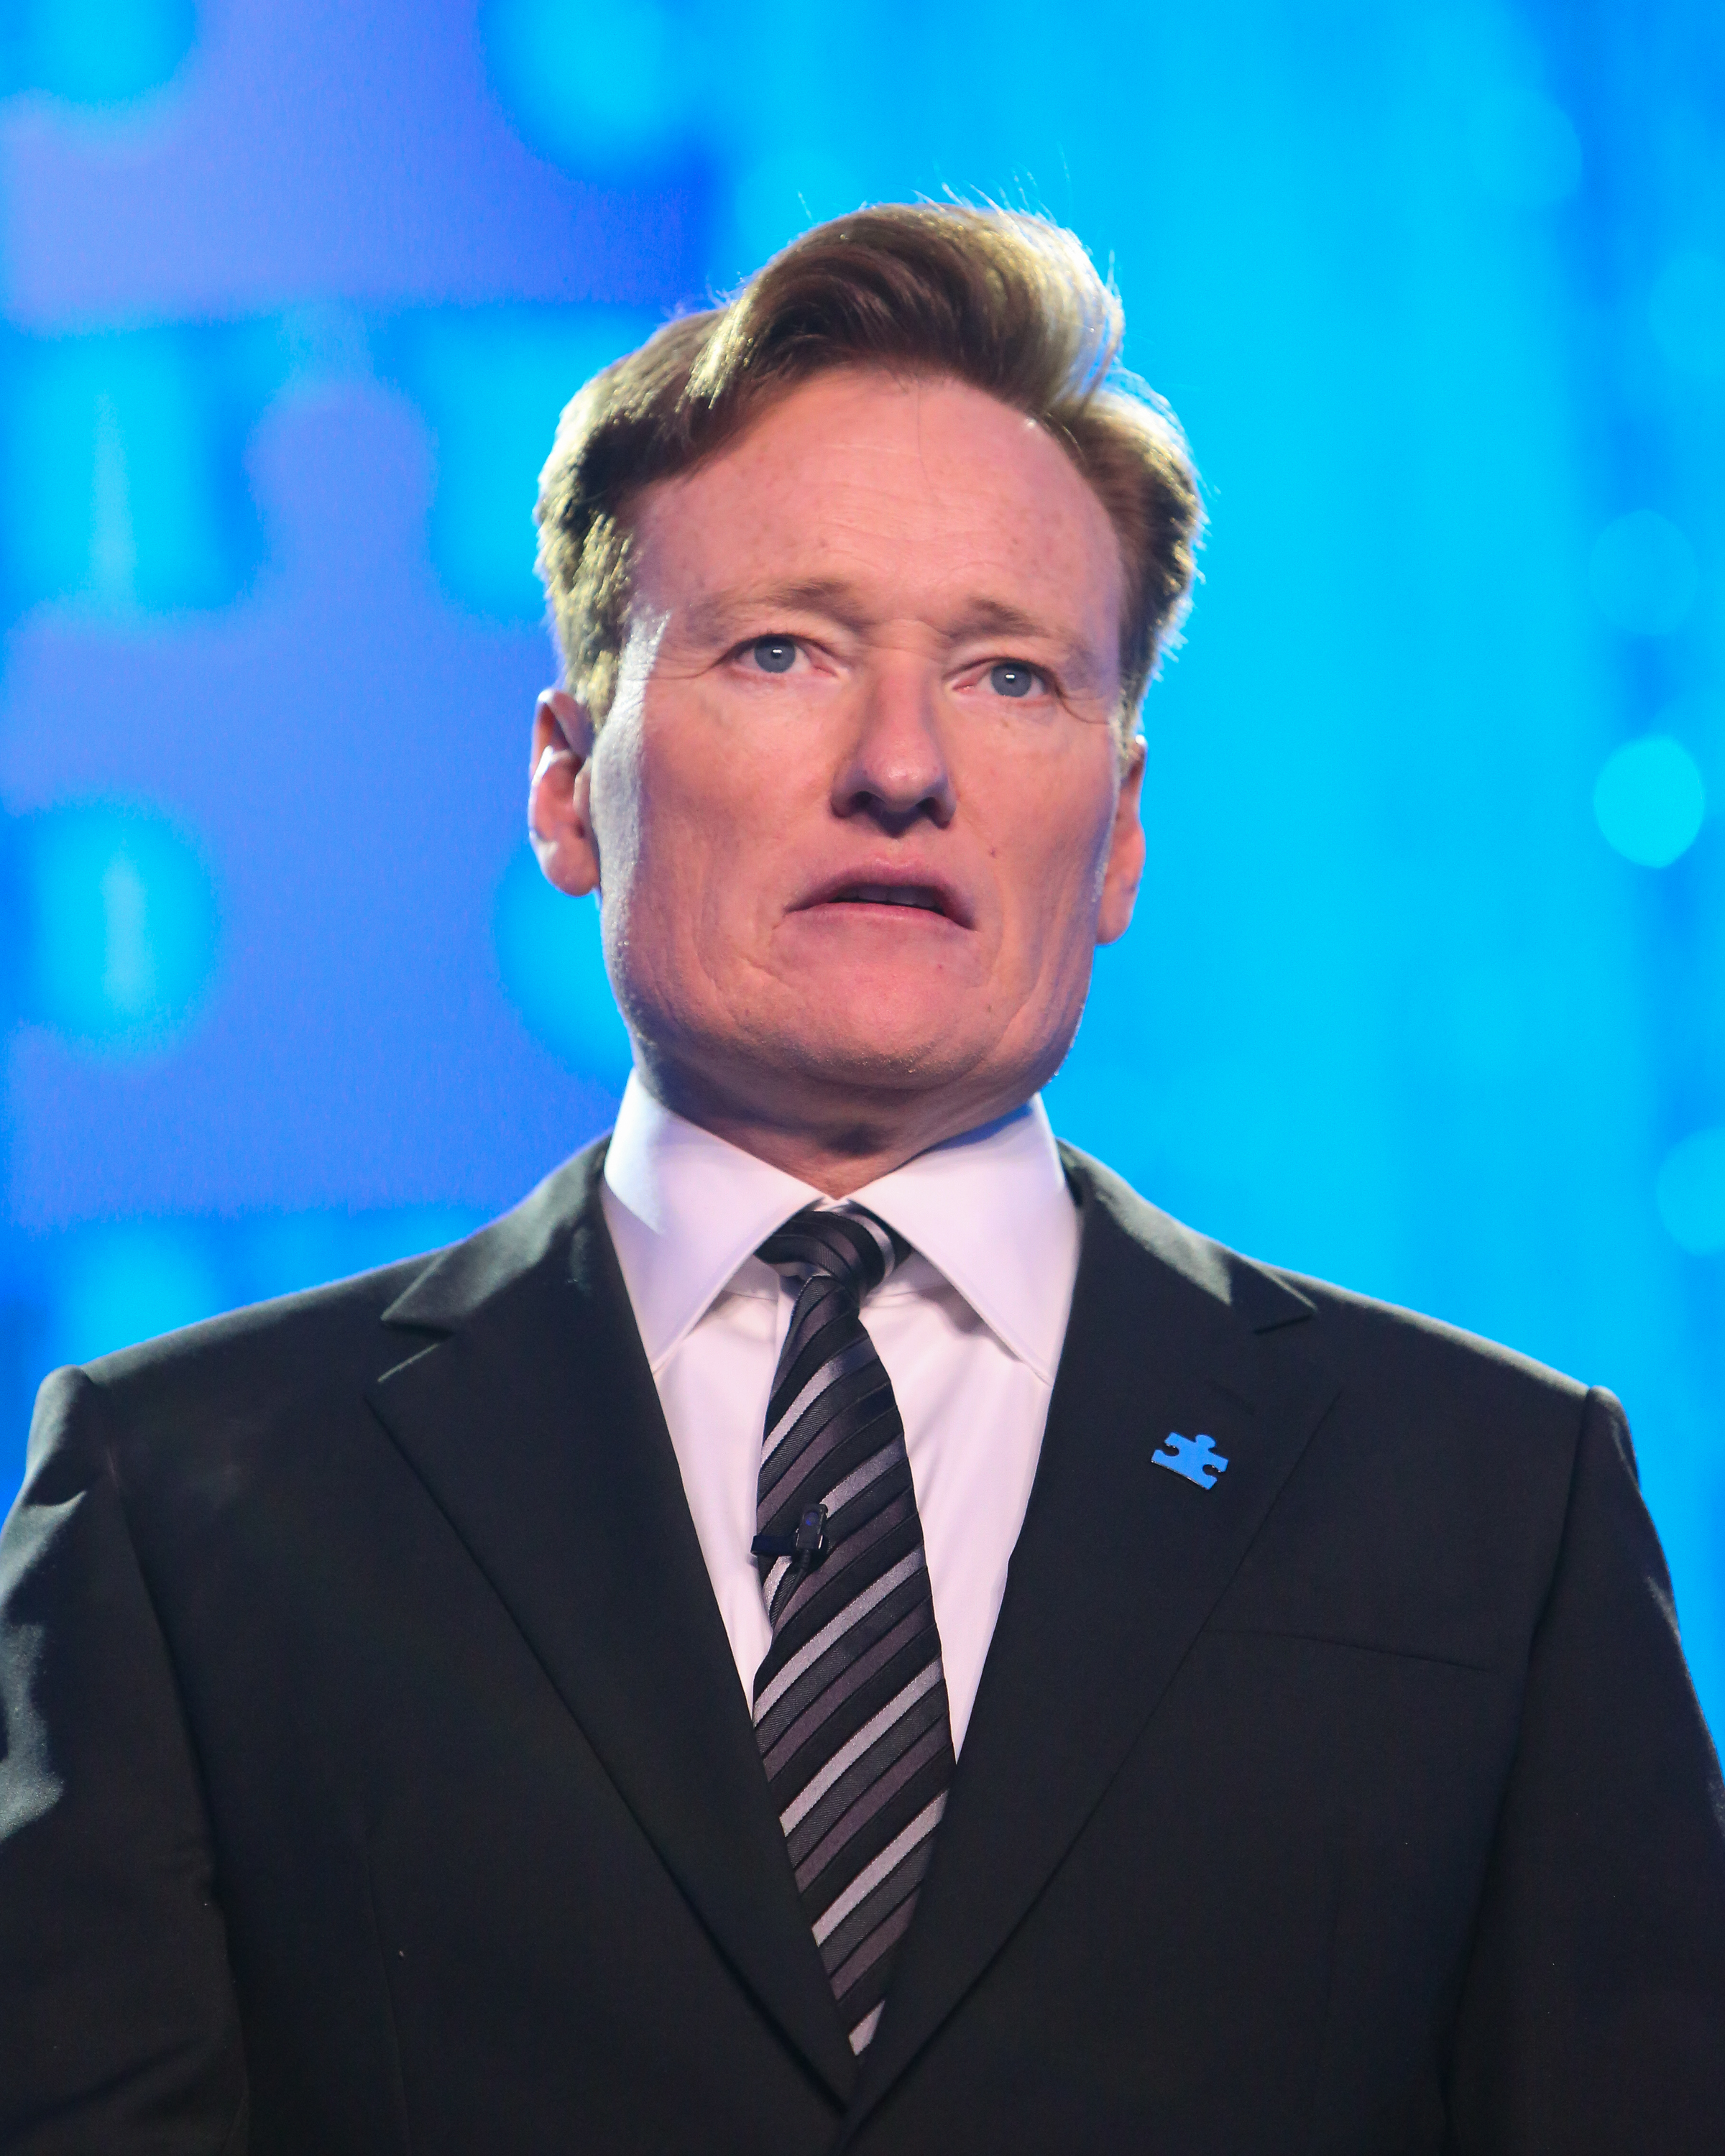 Conan O'Brien at the Autism Speaks To Los Angeles Celebrity Chef Gala in Santa Monica, Calif. on Oct. 8, 2015.